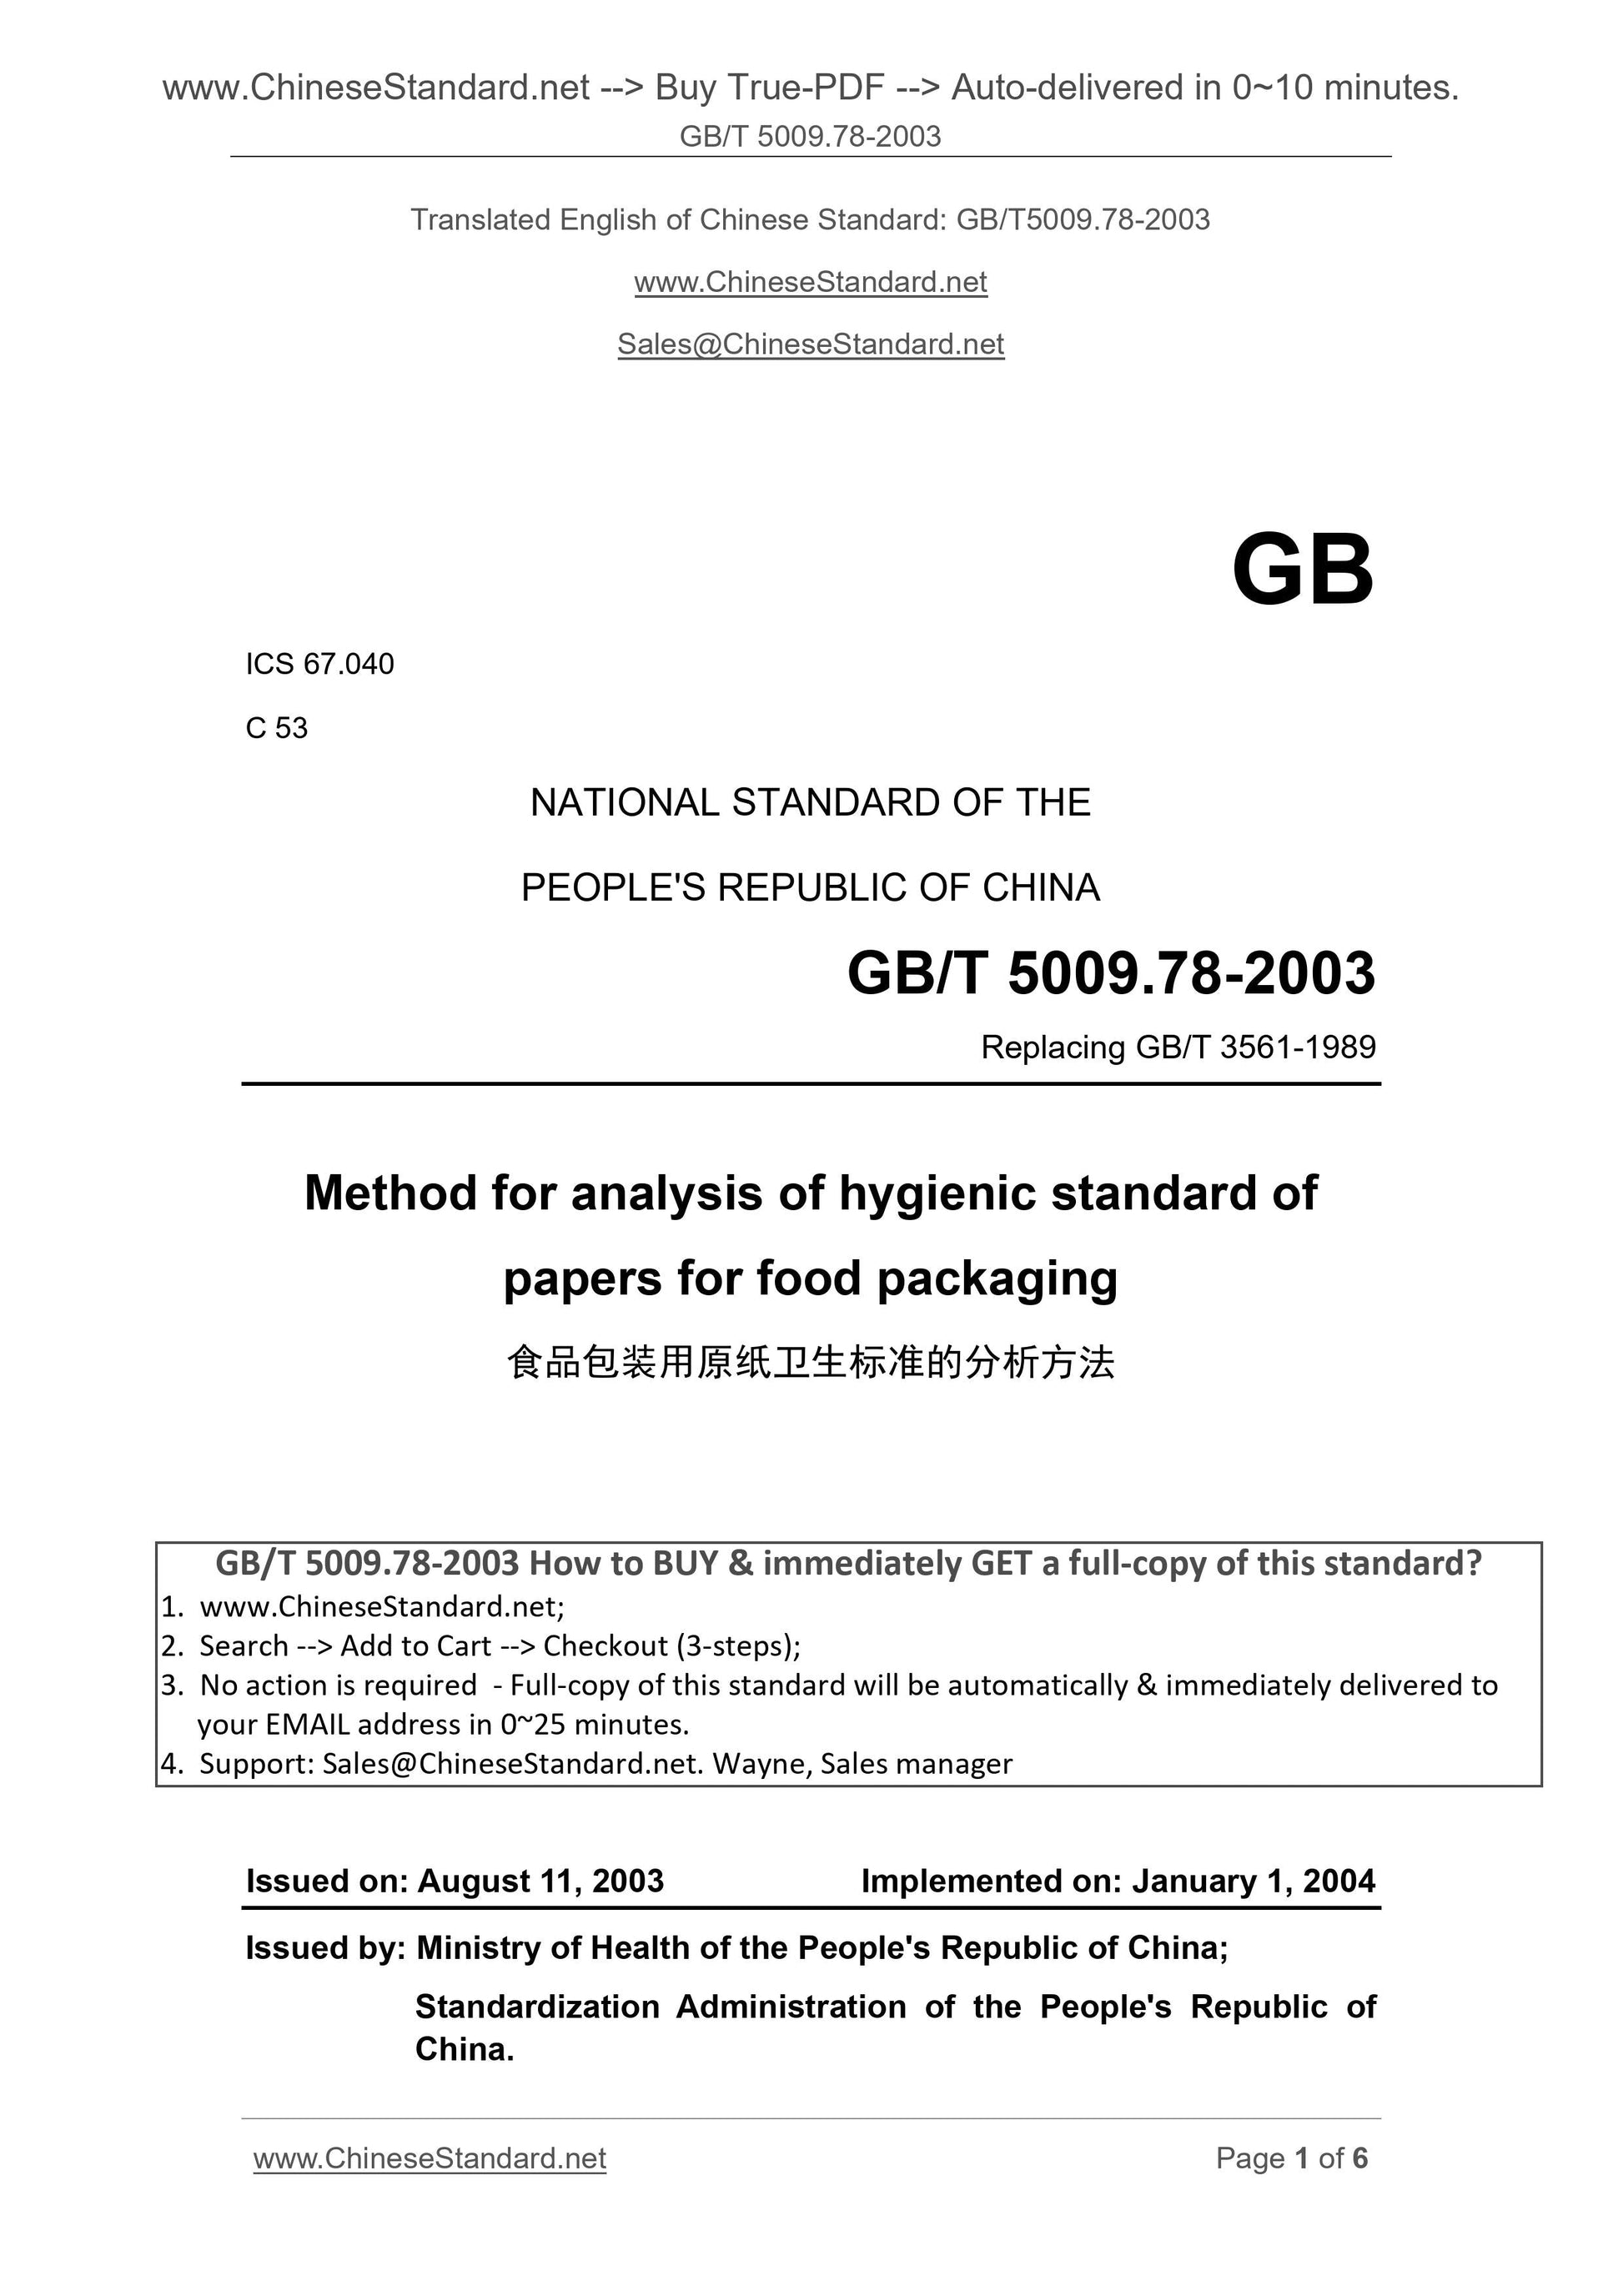 GB/T 5009.78-2003 Page 1